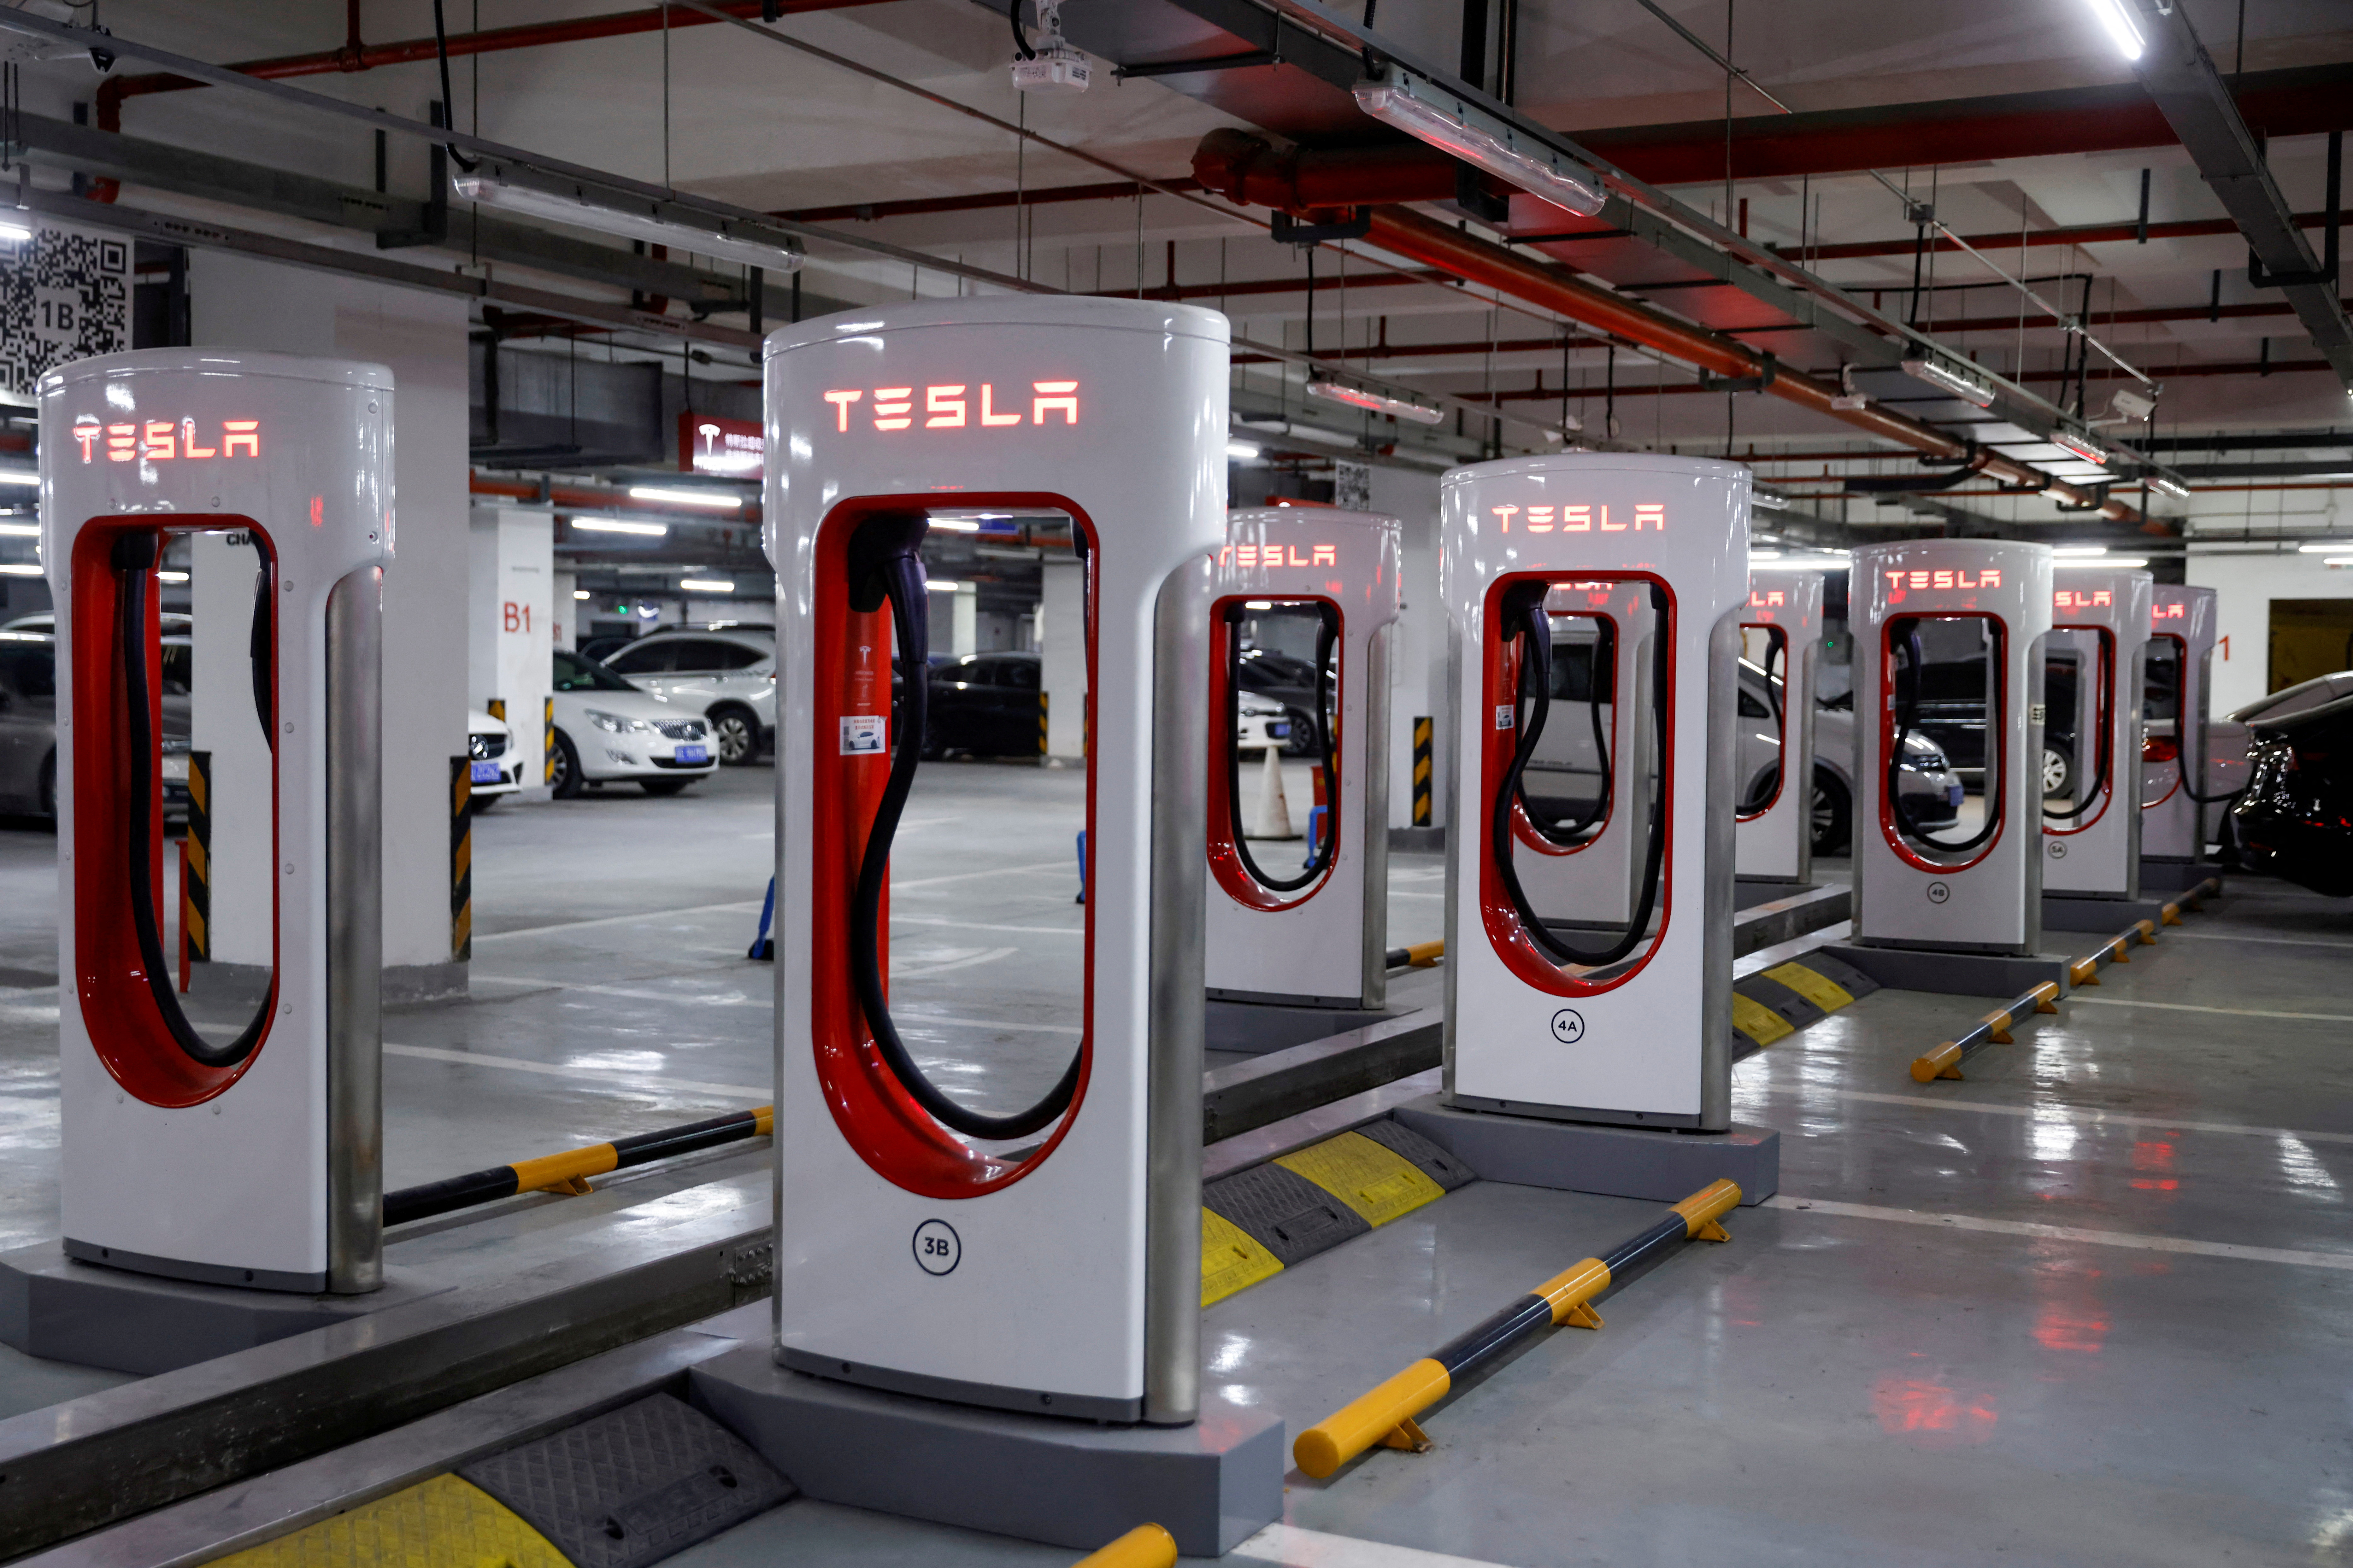 Tesla charging stations are pictured in a parking lot in Shanghai